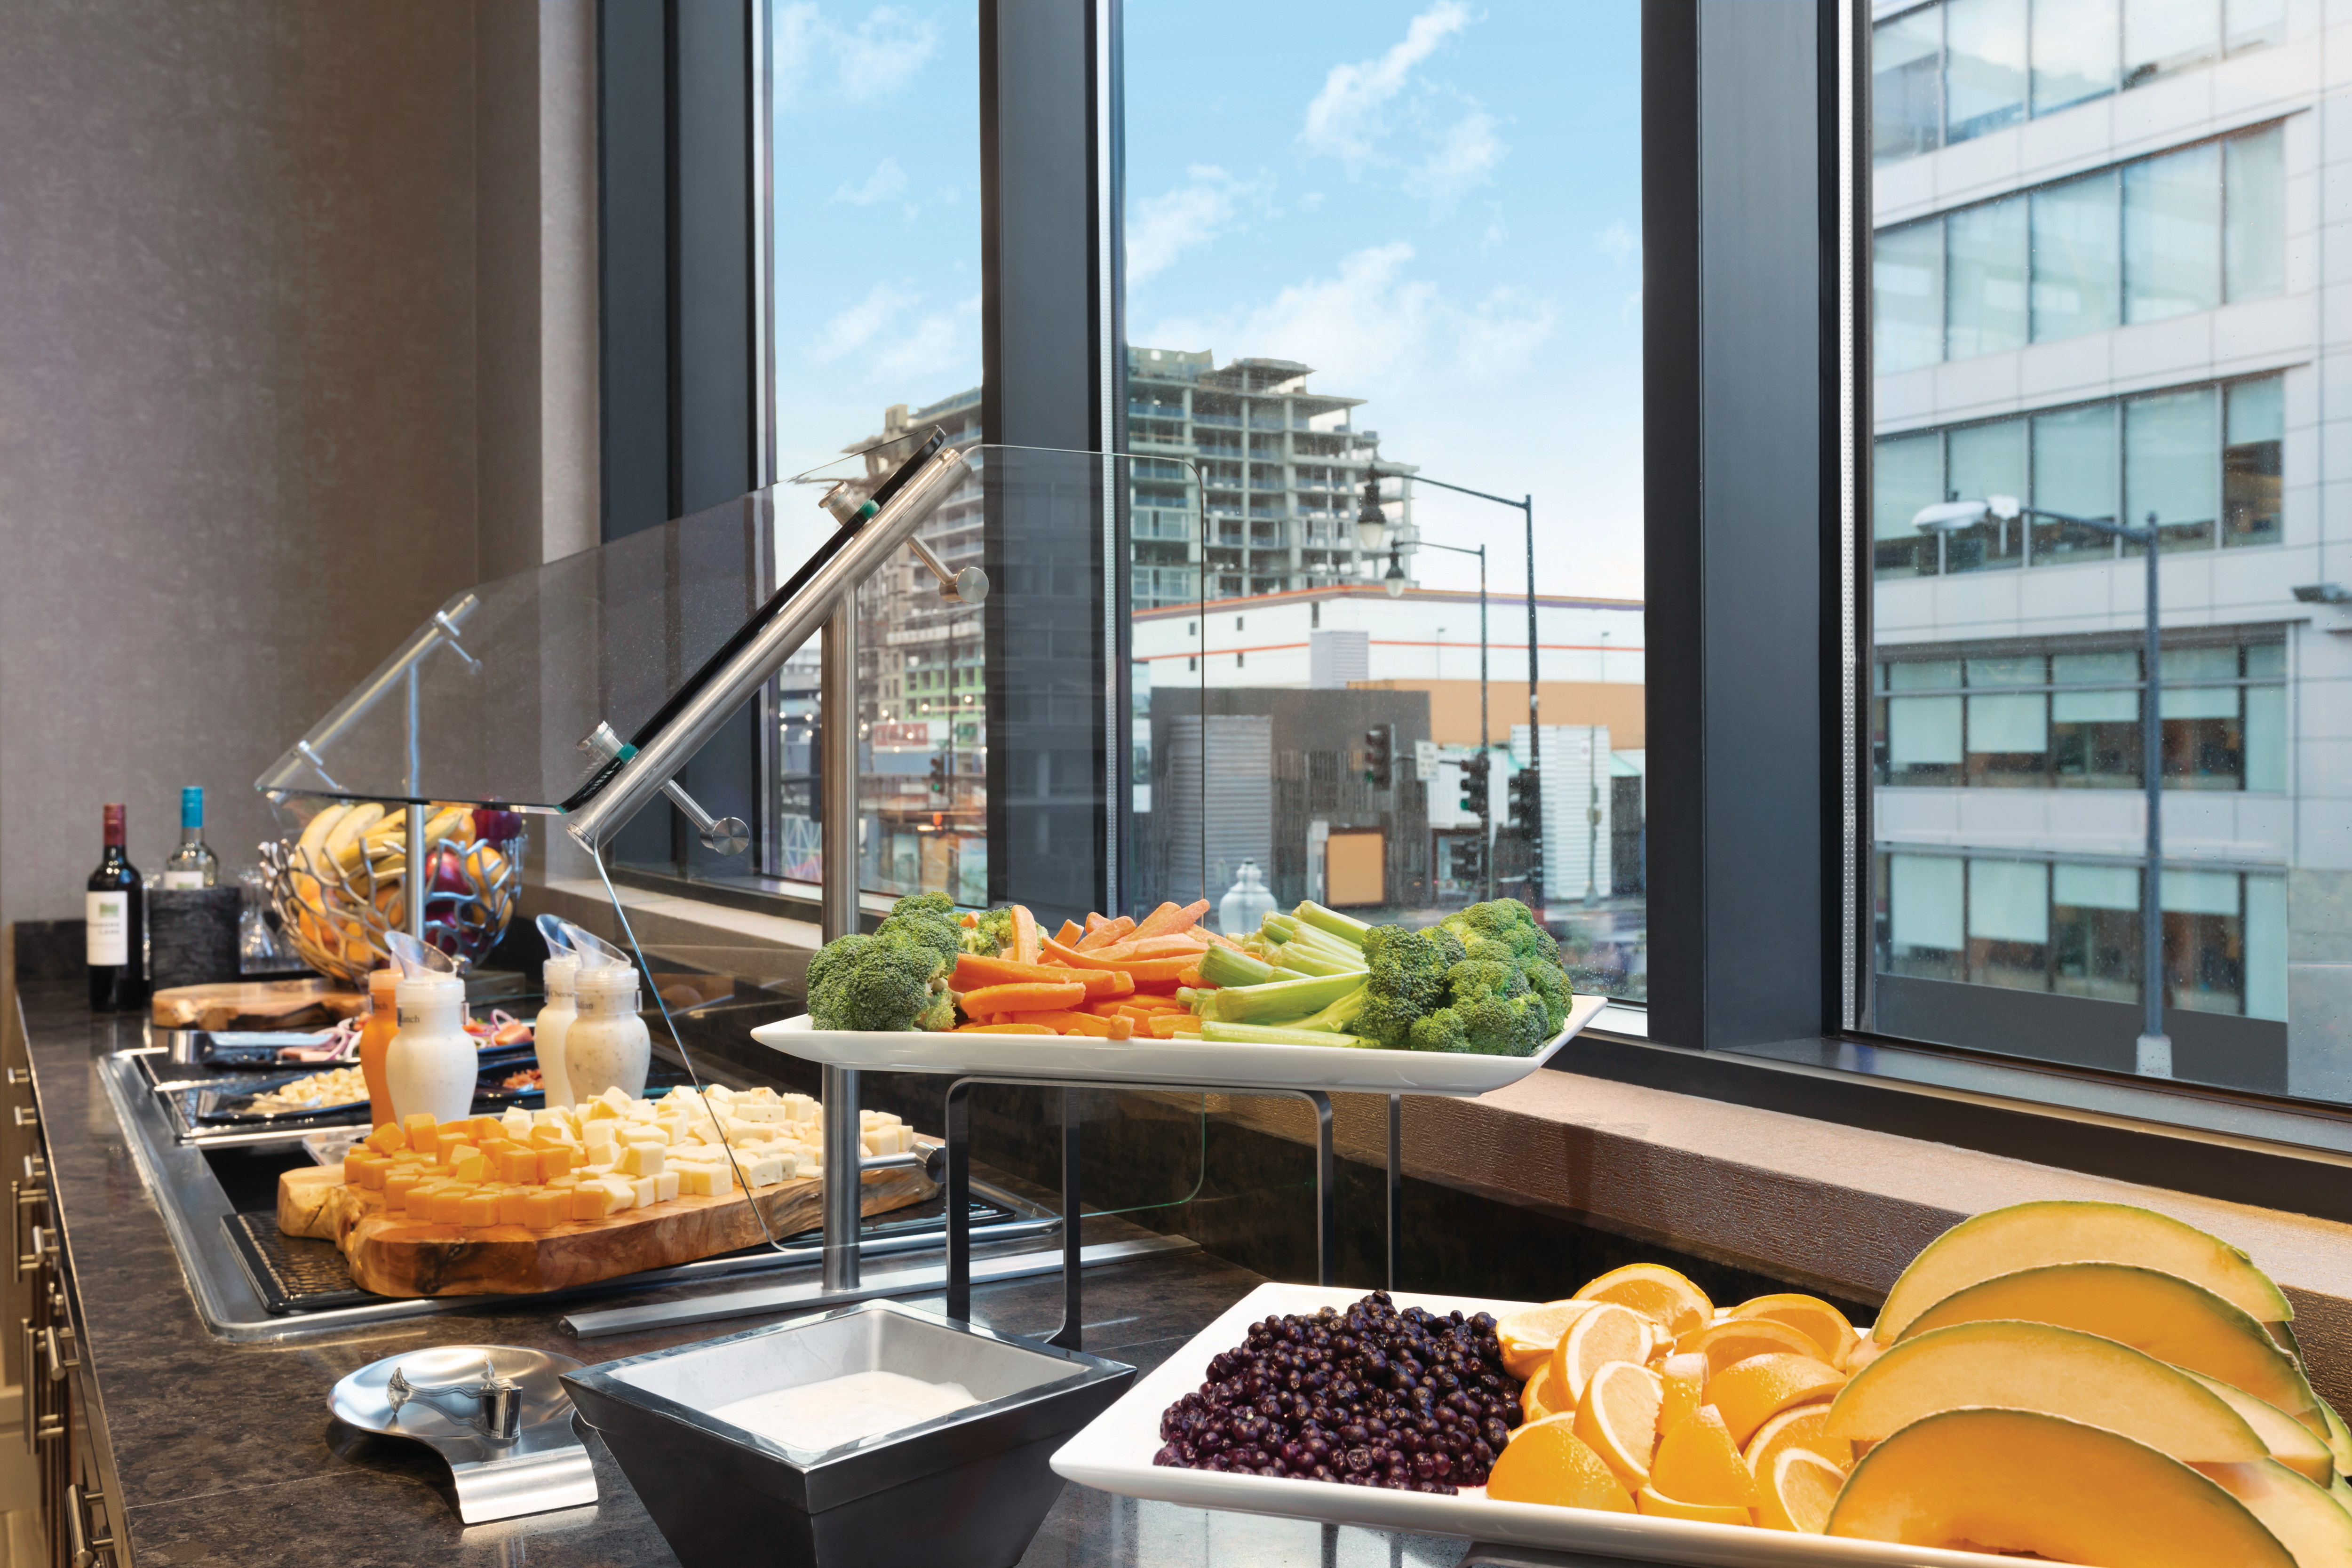 Wine, Cheese, Vegetable and Fruit Selections by Window at Evening SocialHealthy Options like Fresh Fruit, Yogurt and Granola at our Complimentary Breakfast Buffet